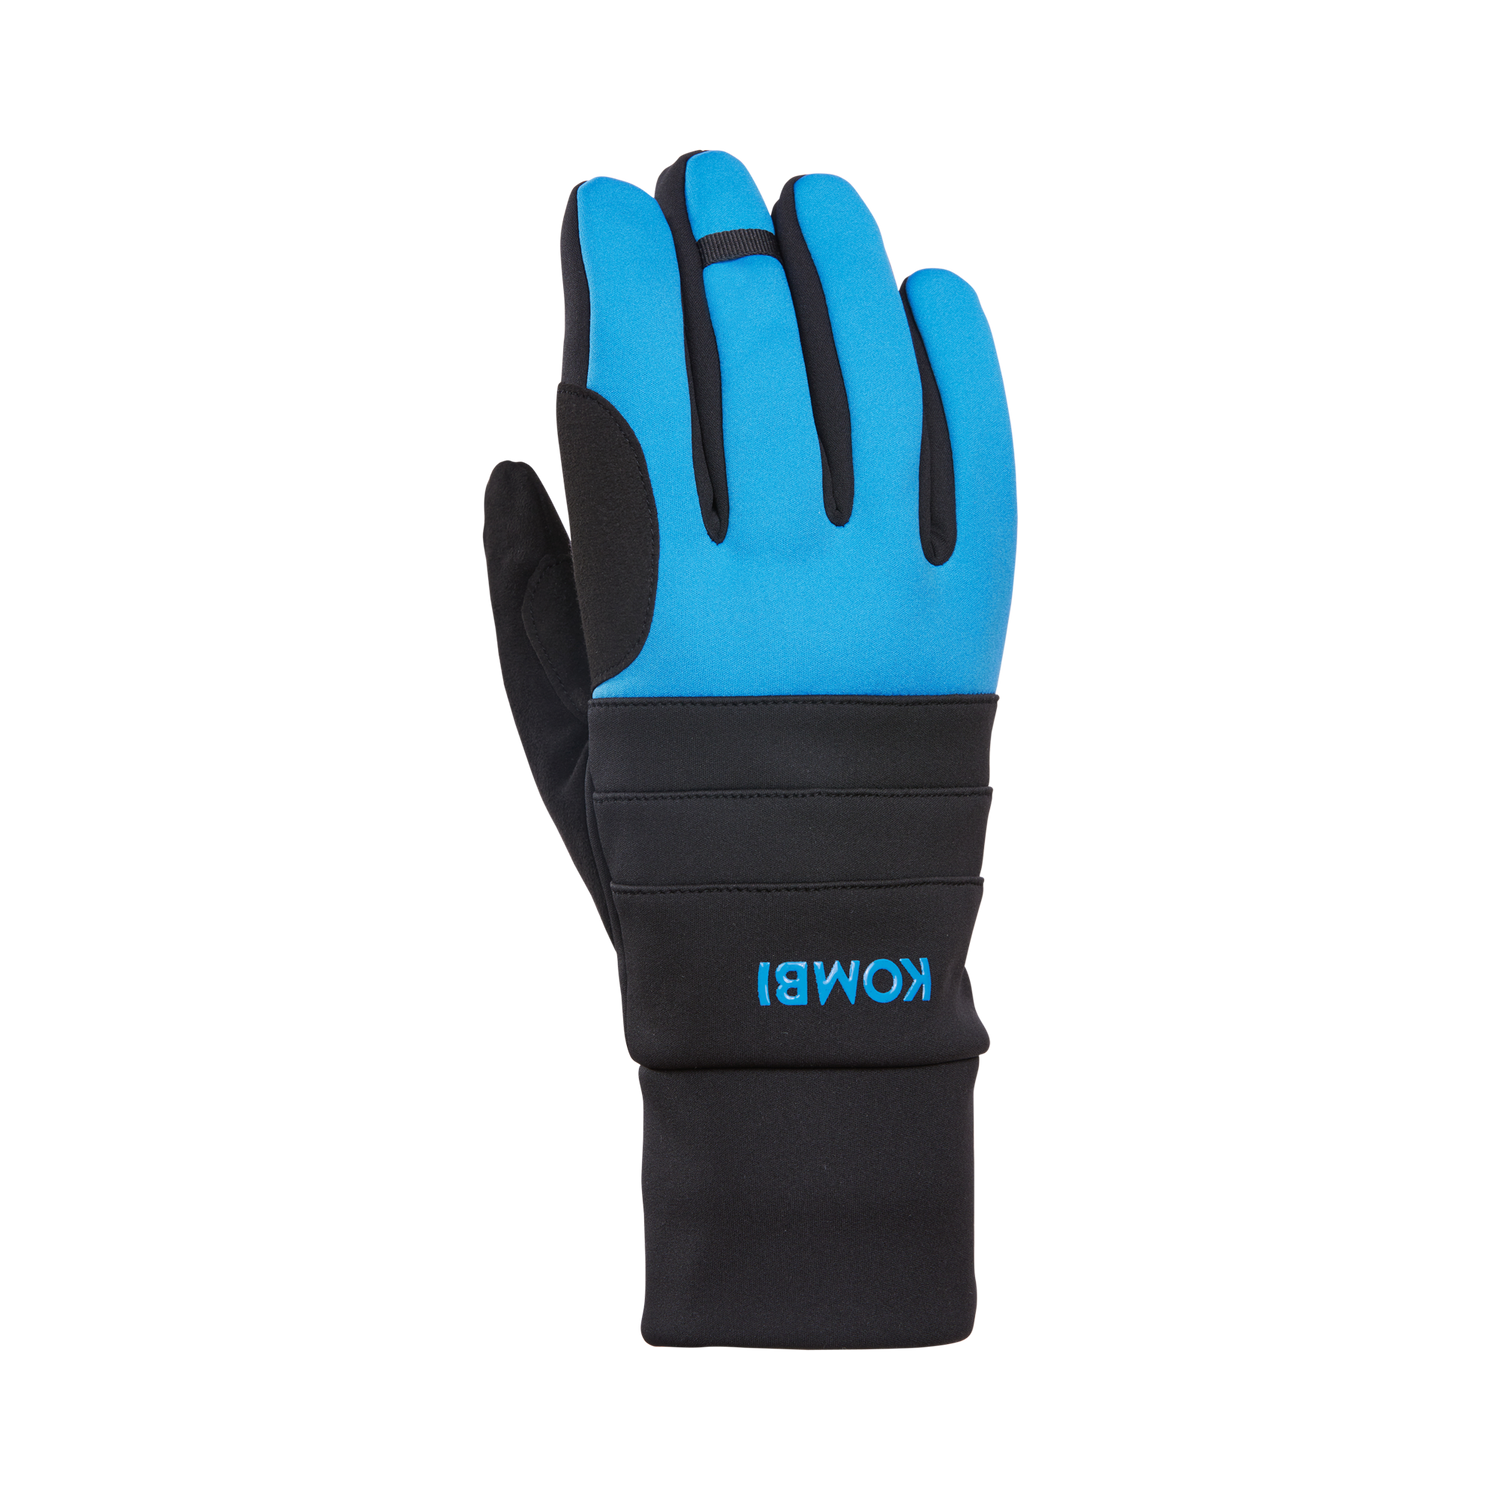 Best Kayaking Gloves for Comfort and Grip, by XtremeSports.net